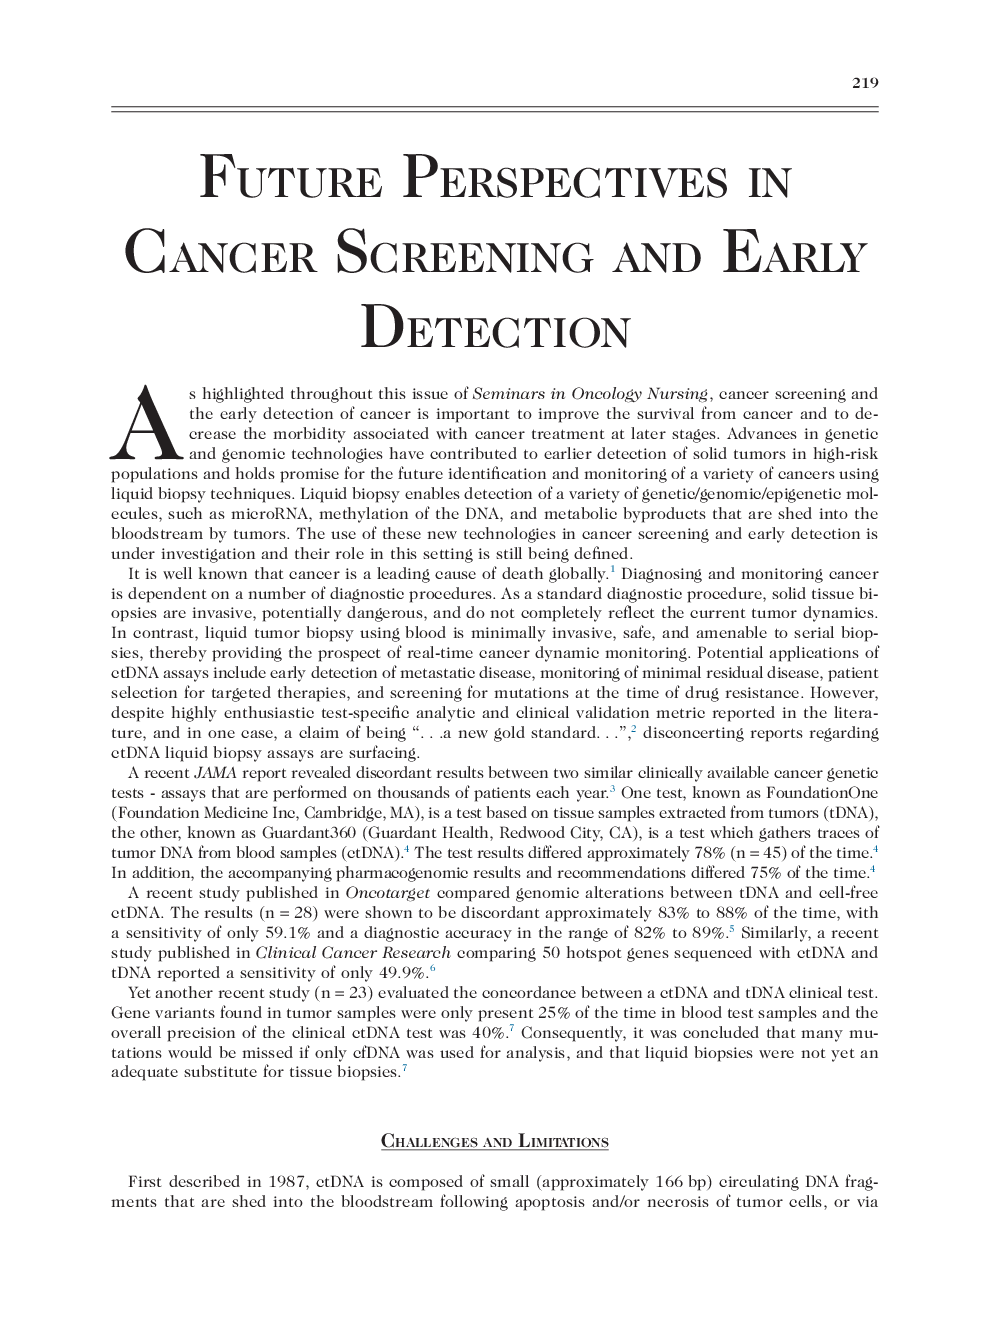 Future Perspectives in Cancer Screening and Early Detection